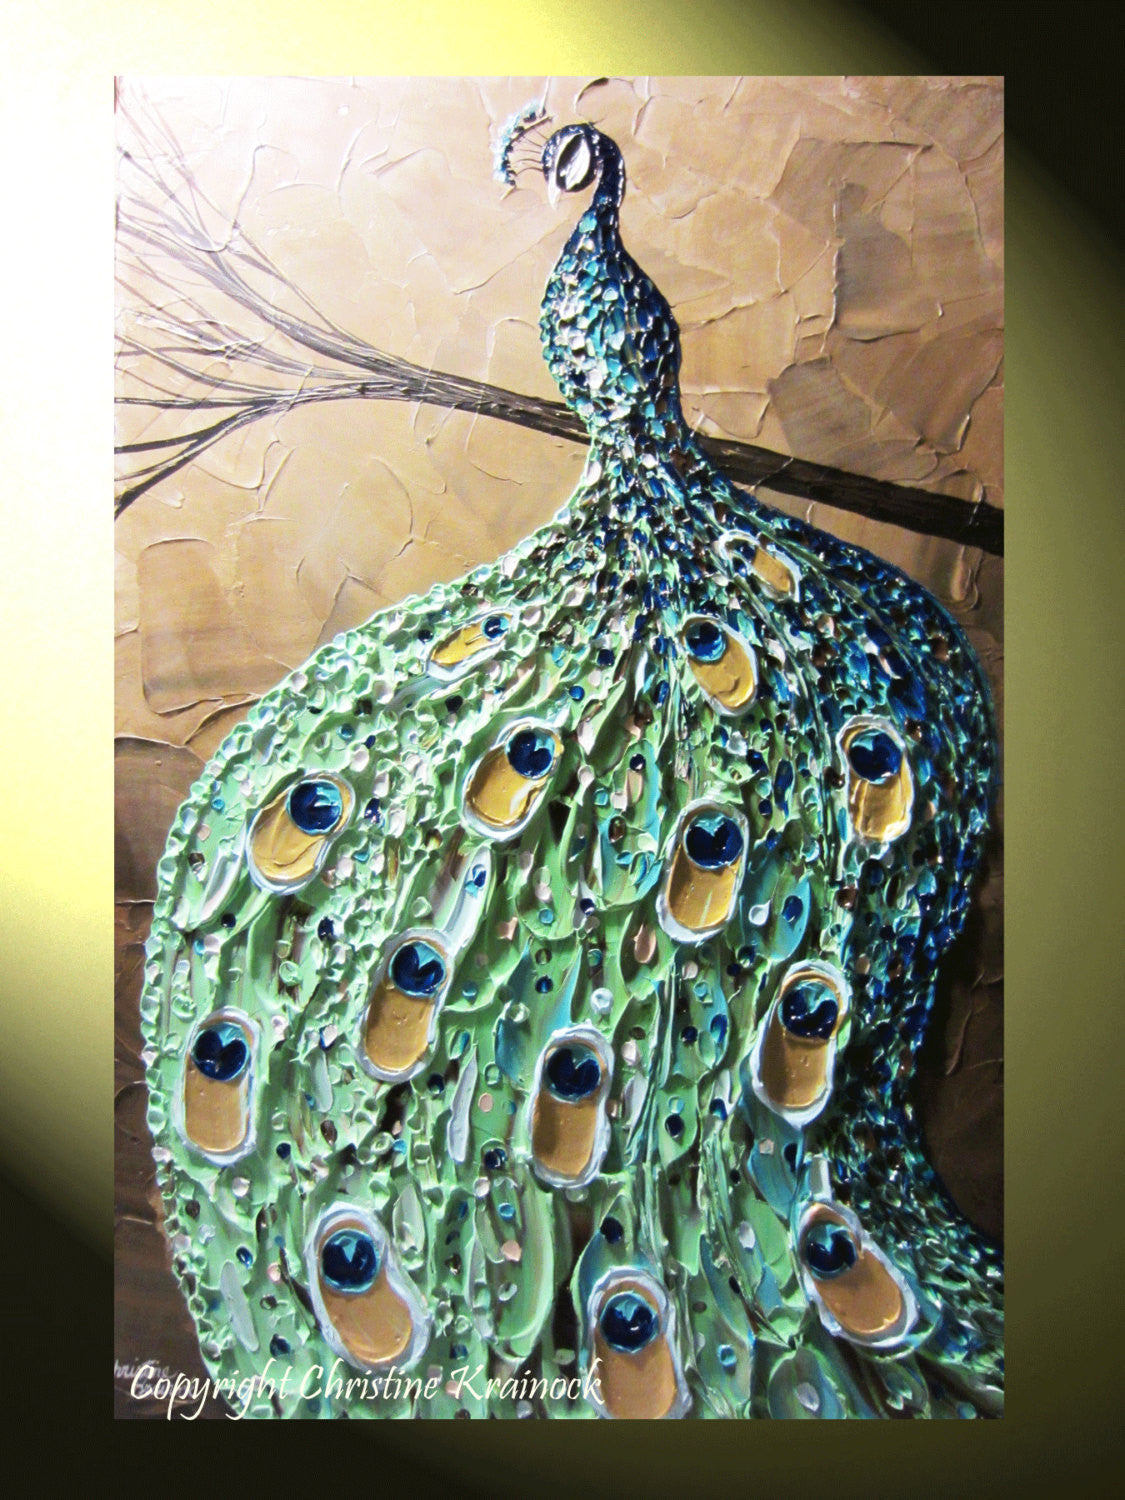 Load image into Gallery viewer, CUSTOM Abstract Painting Peacock Textured Contemporary Art Blue Green Gold MADE to ORDER - Christine Krainock Art - Contemporary Art by Christine - 4
